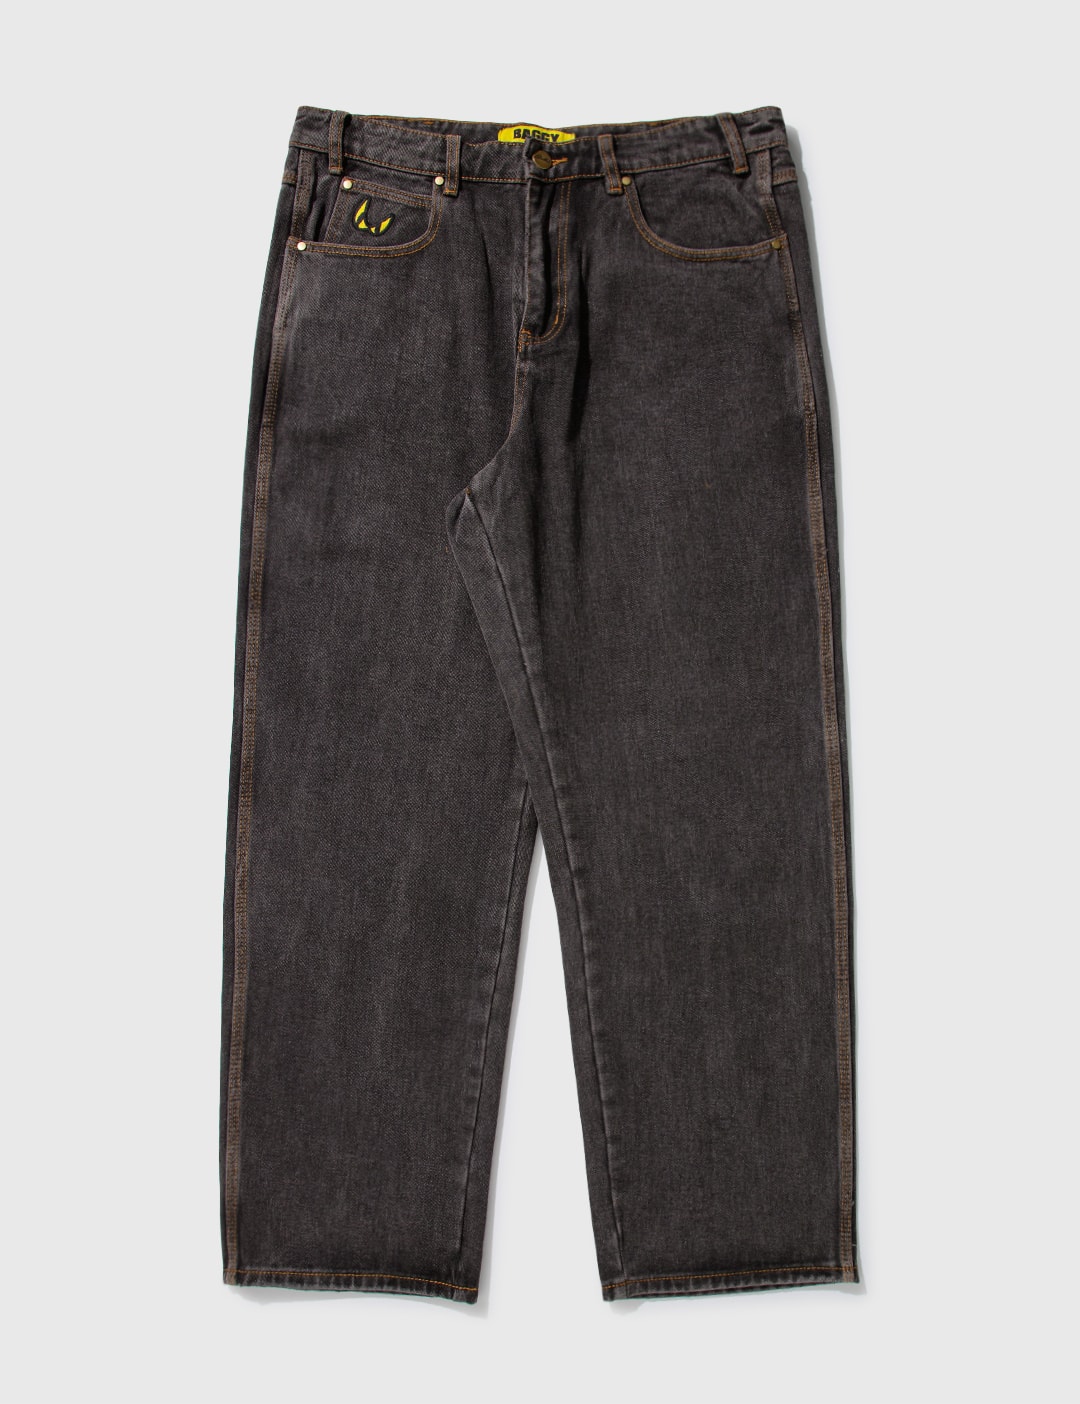 Butter Goods - Spinner Denim Jeans | HBX - Globally Curated Fashion and ...